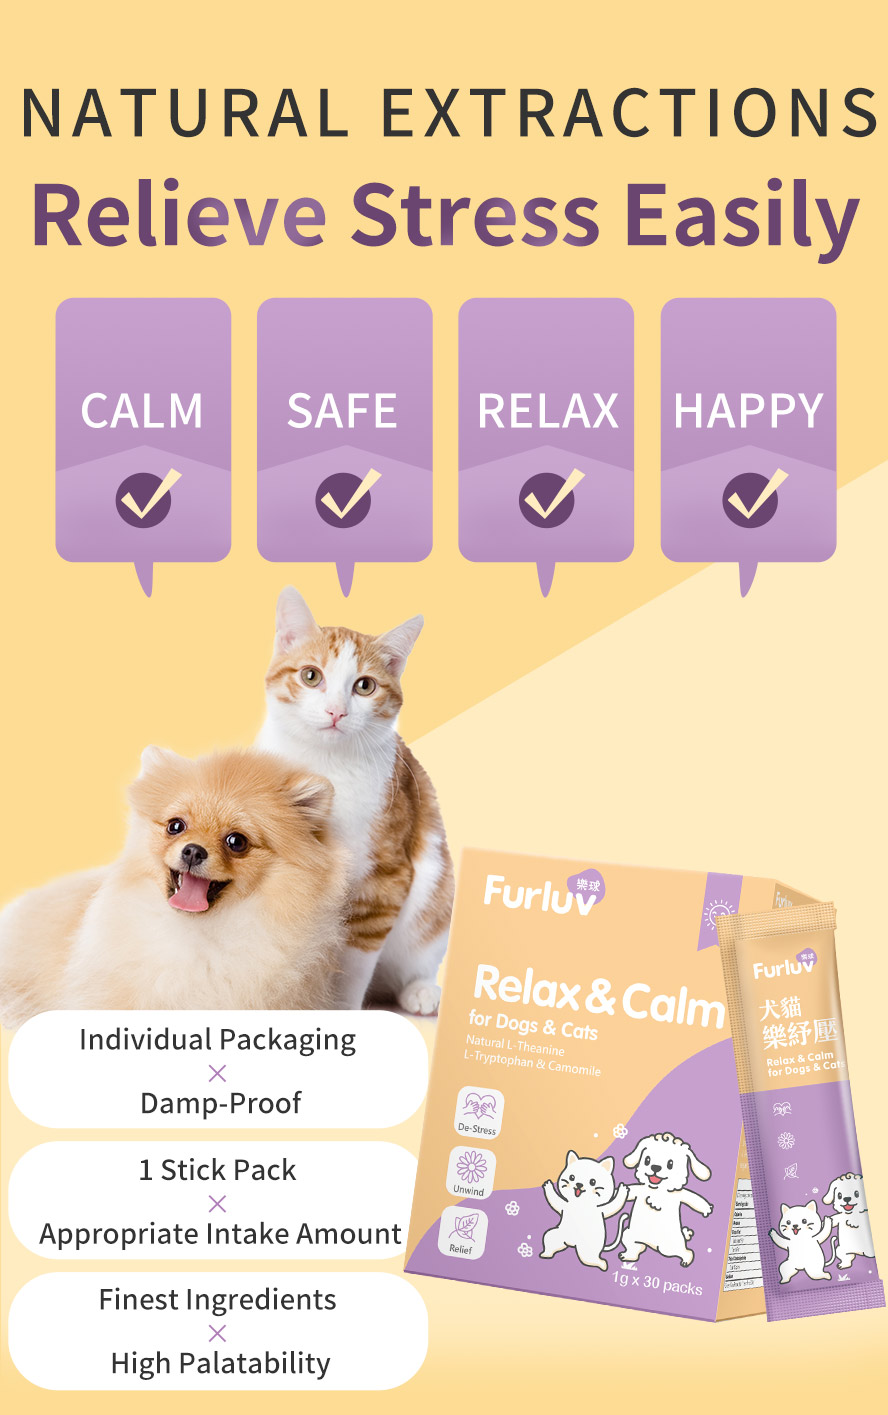 Furluv Relax & Calm for Dogs and Cats relieve stress easily with high palatability, convinient damp-proof individual packaging, and finest ingredients.